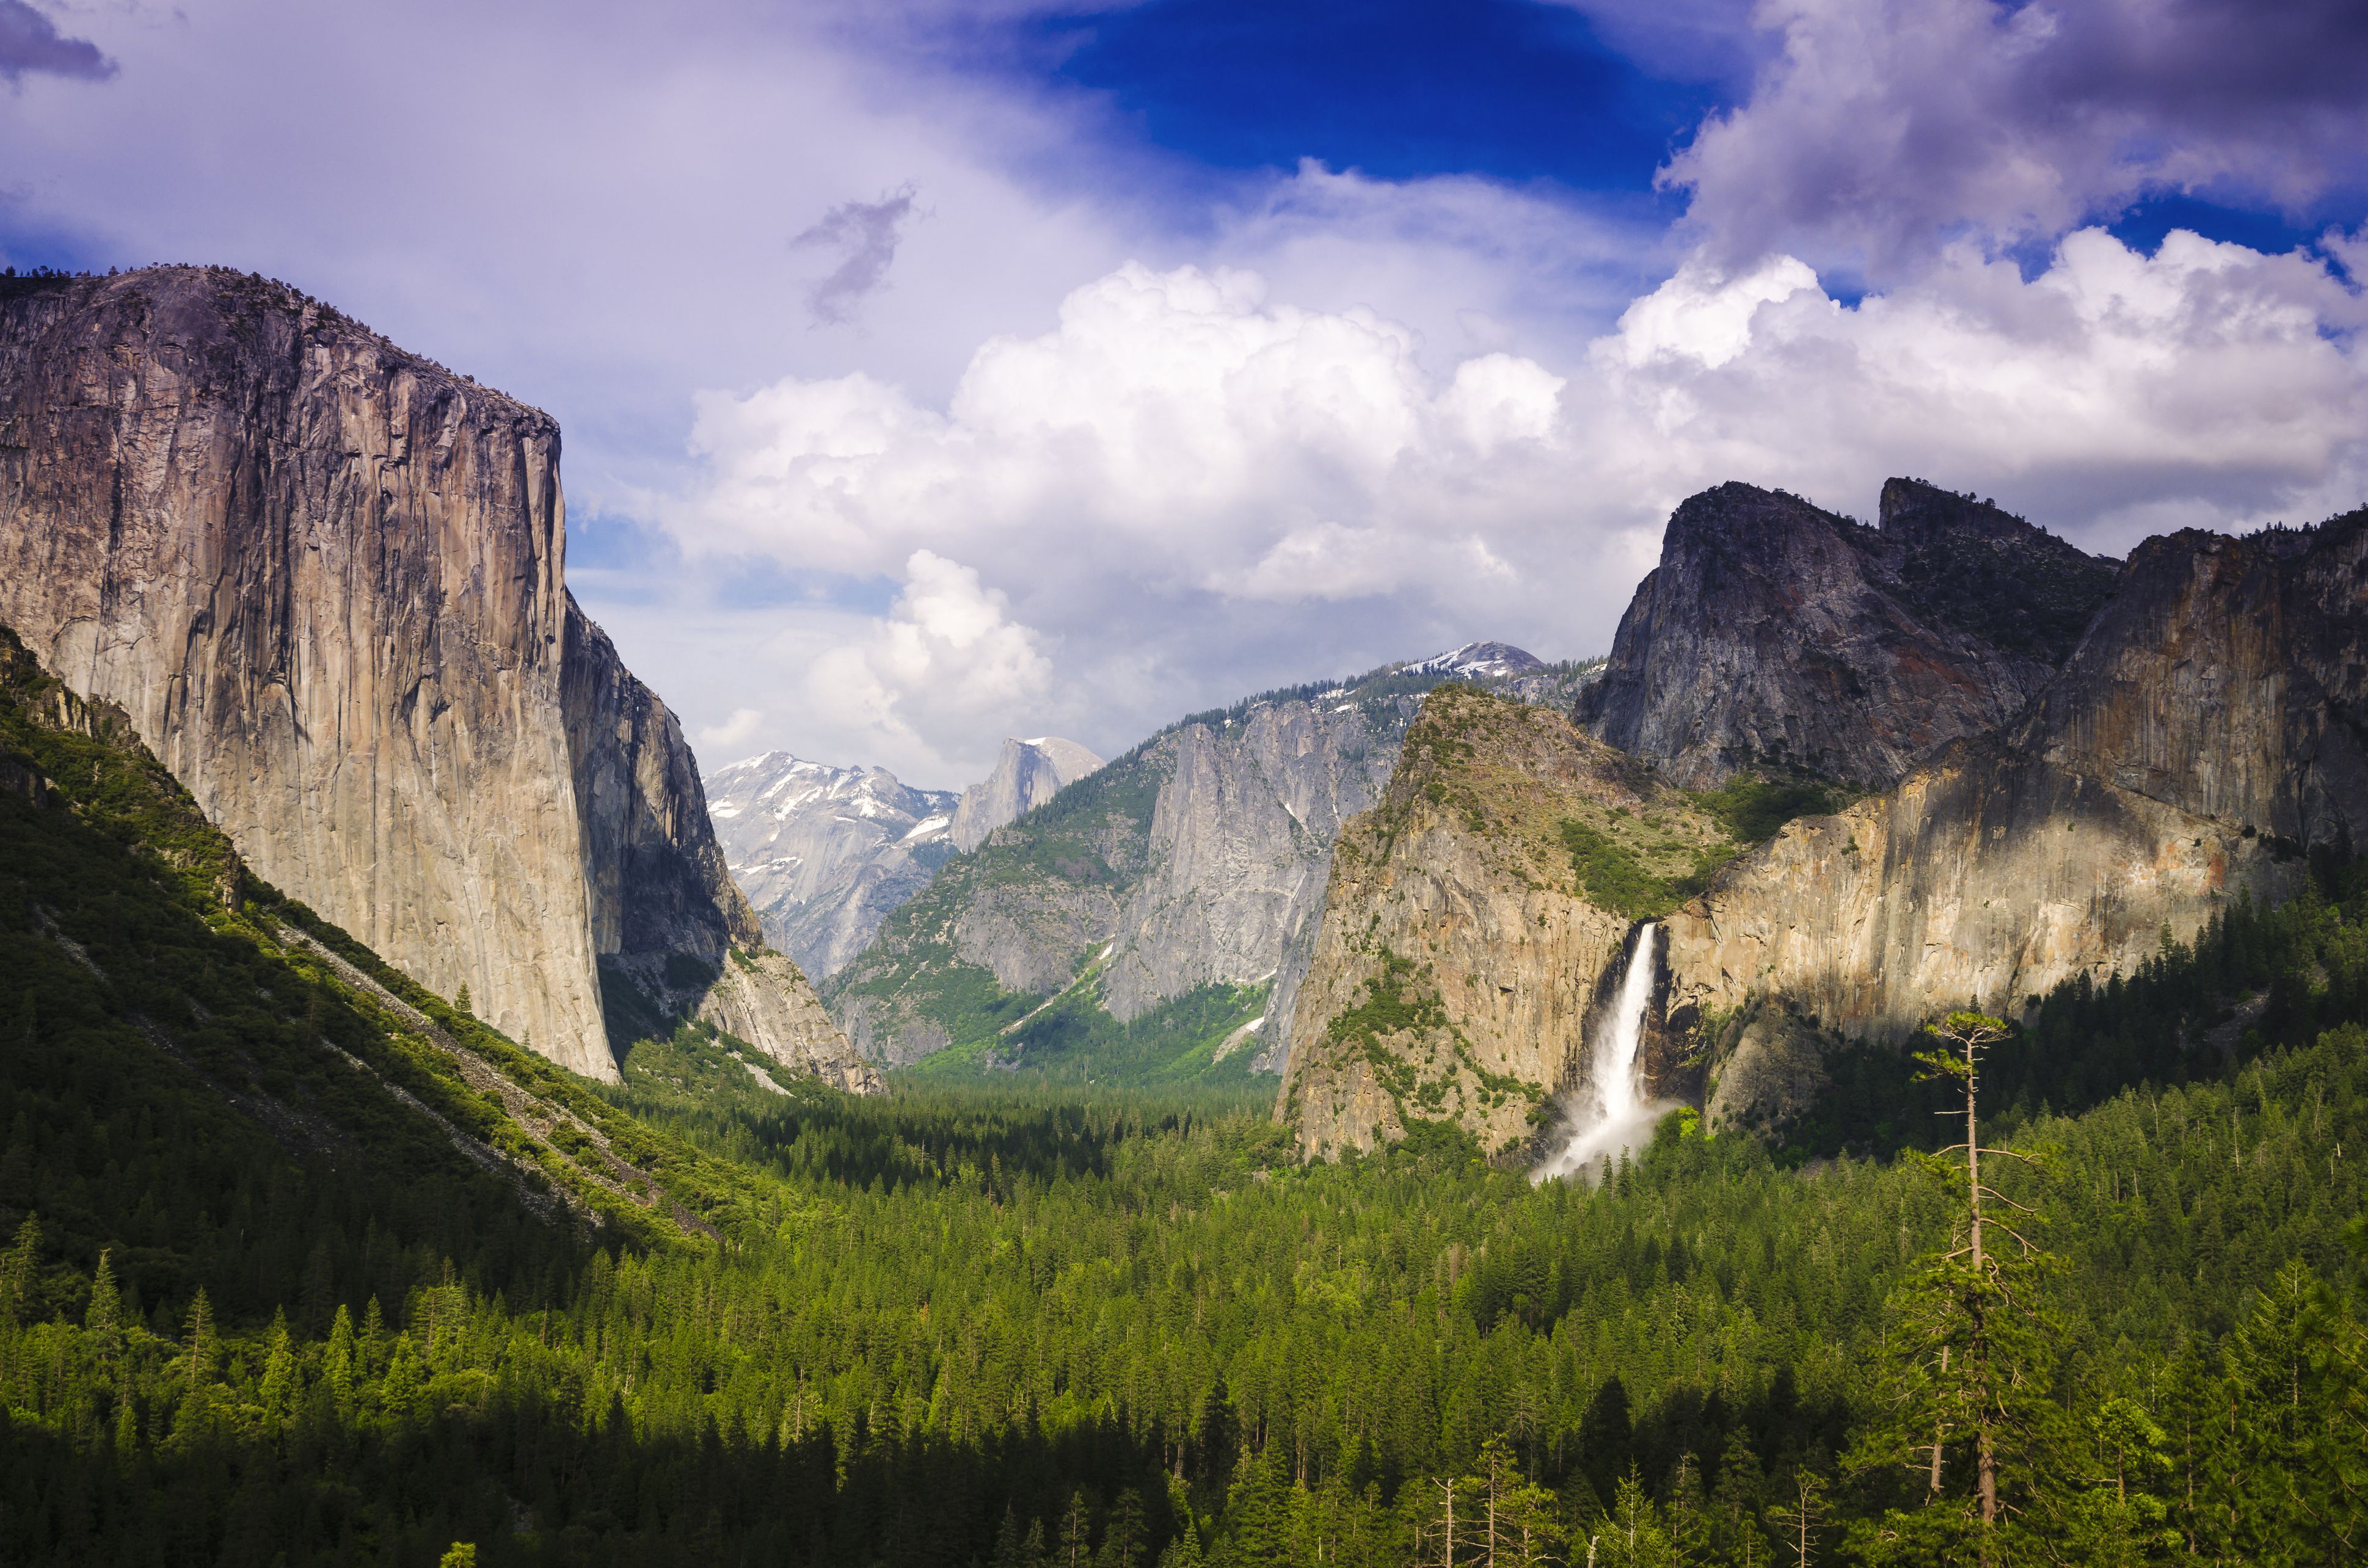 Traveling from San Francisco to Yosemite National Park